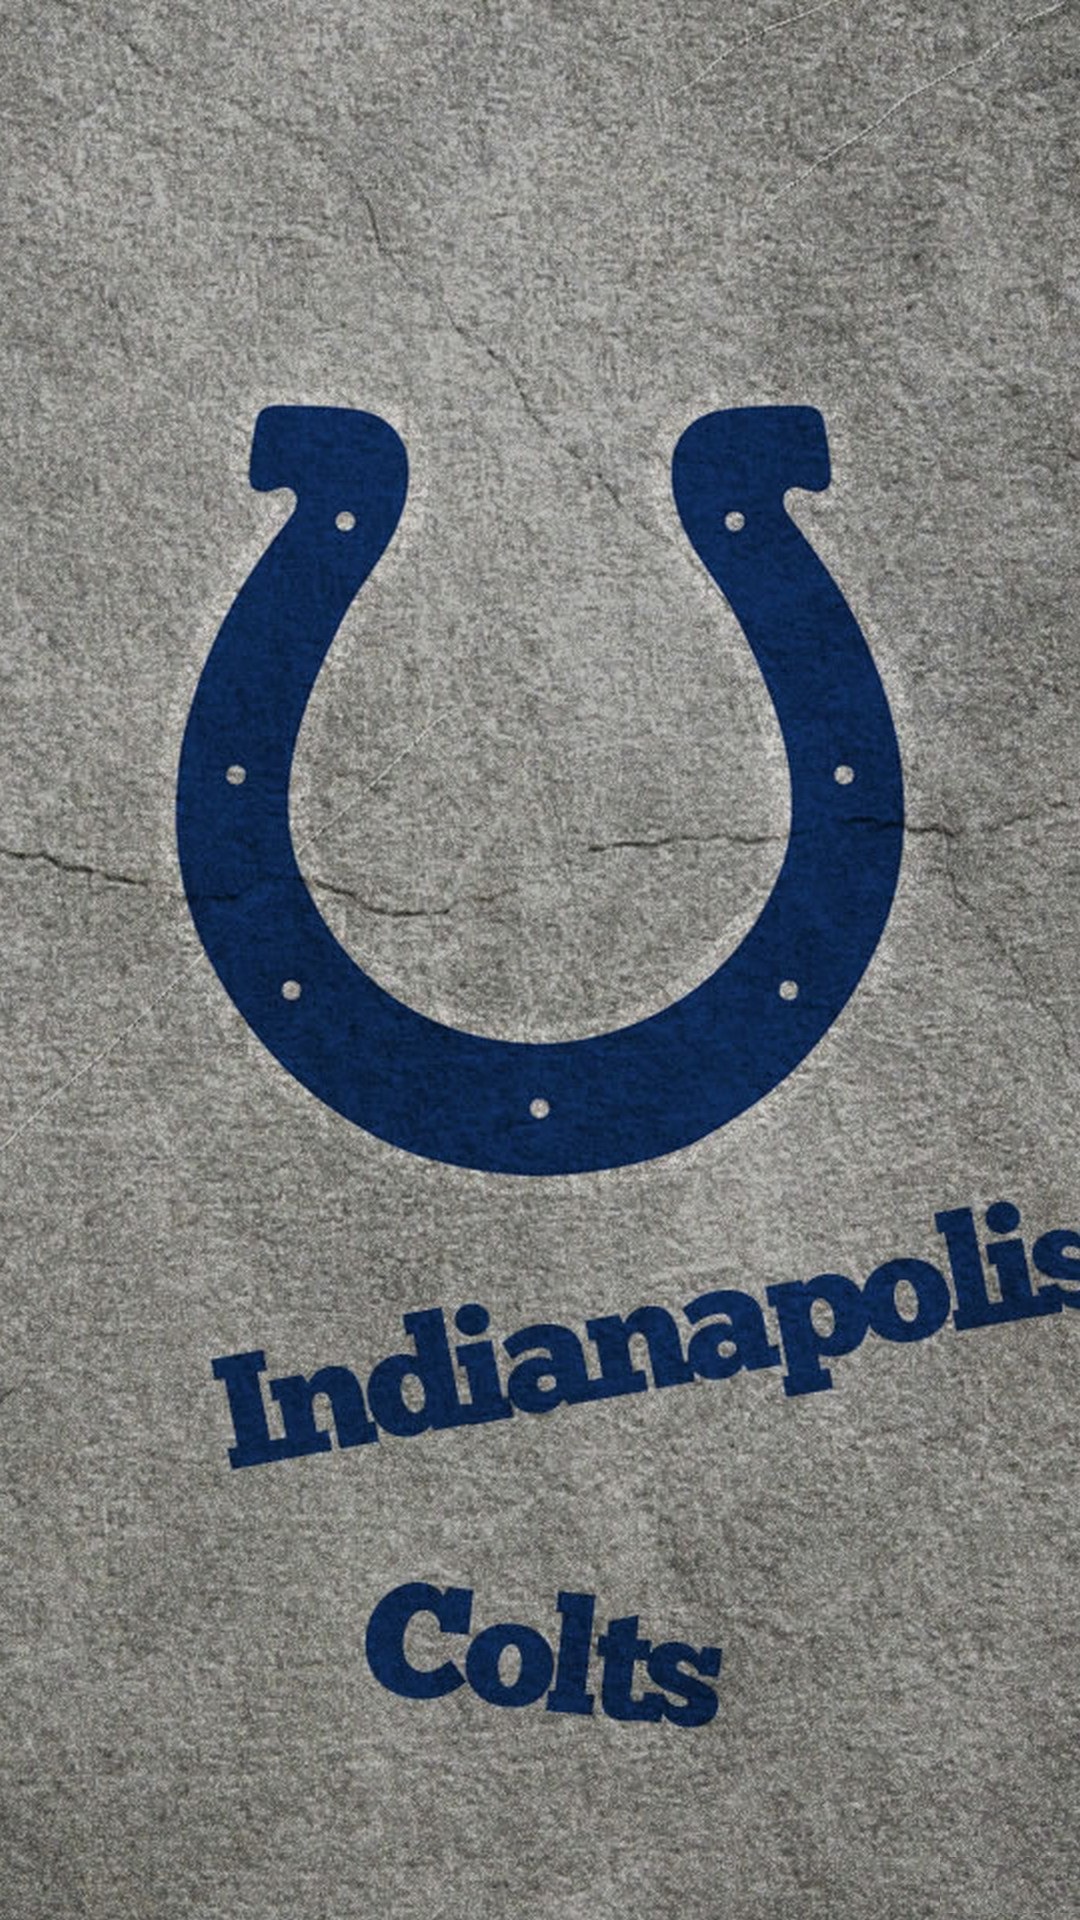 Indianapolis Colts iPhone Lock Screen Wallpaper with high-resolution 1080x1920 pixel. Donwload and set as wallpaper for your iPhone X, iPhone XS home screen backgrounds, XS Max, XR, iPhone8 lock screen wallpaper, iPhone 7, 6, SE and other mobile devices